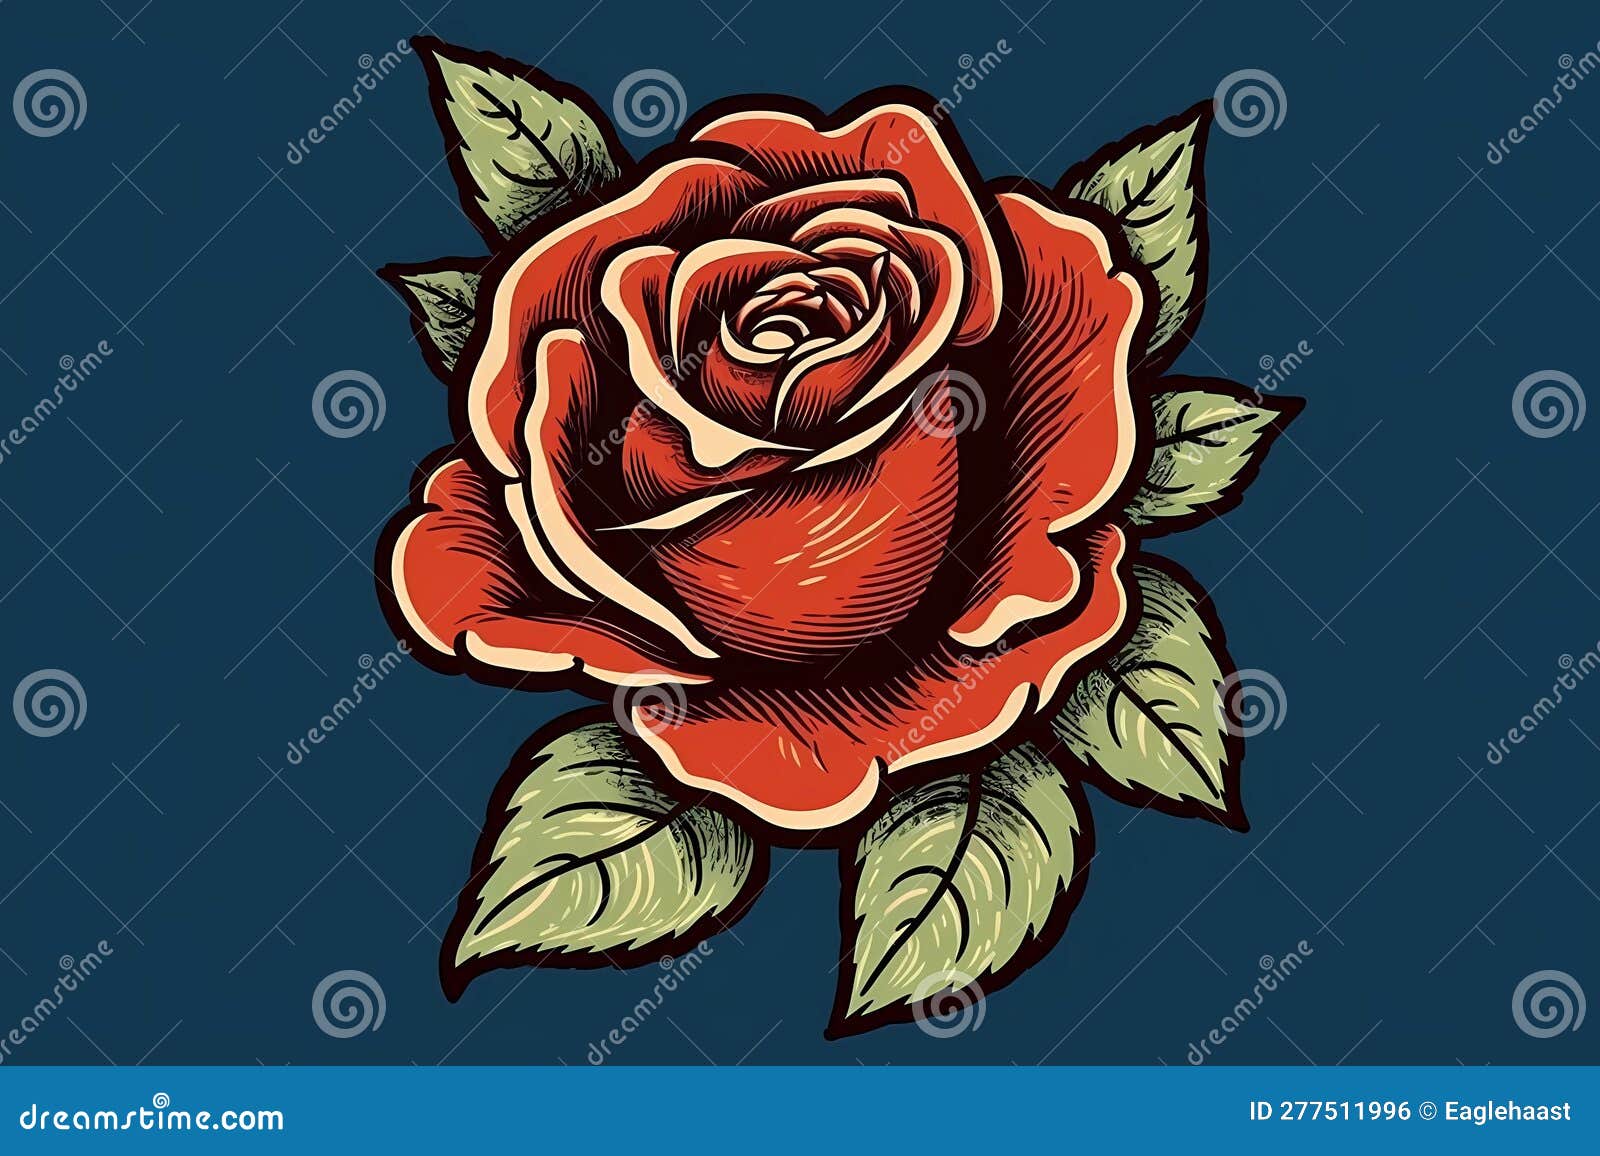 Vector Icon Of Gorgeous Bright Red Rose Bud Of Garden Flower Tattoo Artwork  Nature Theme Design For Sticker Tshirt Print Or Postcard Stock Illustration  - Download Image Now - iStock